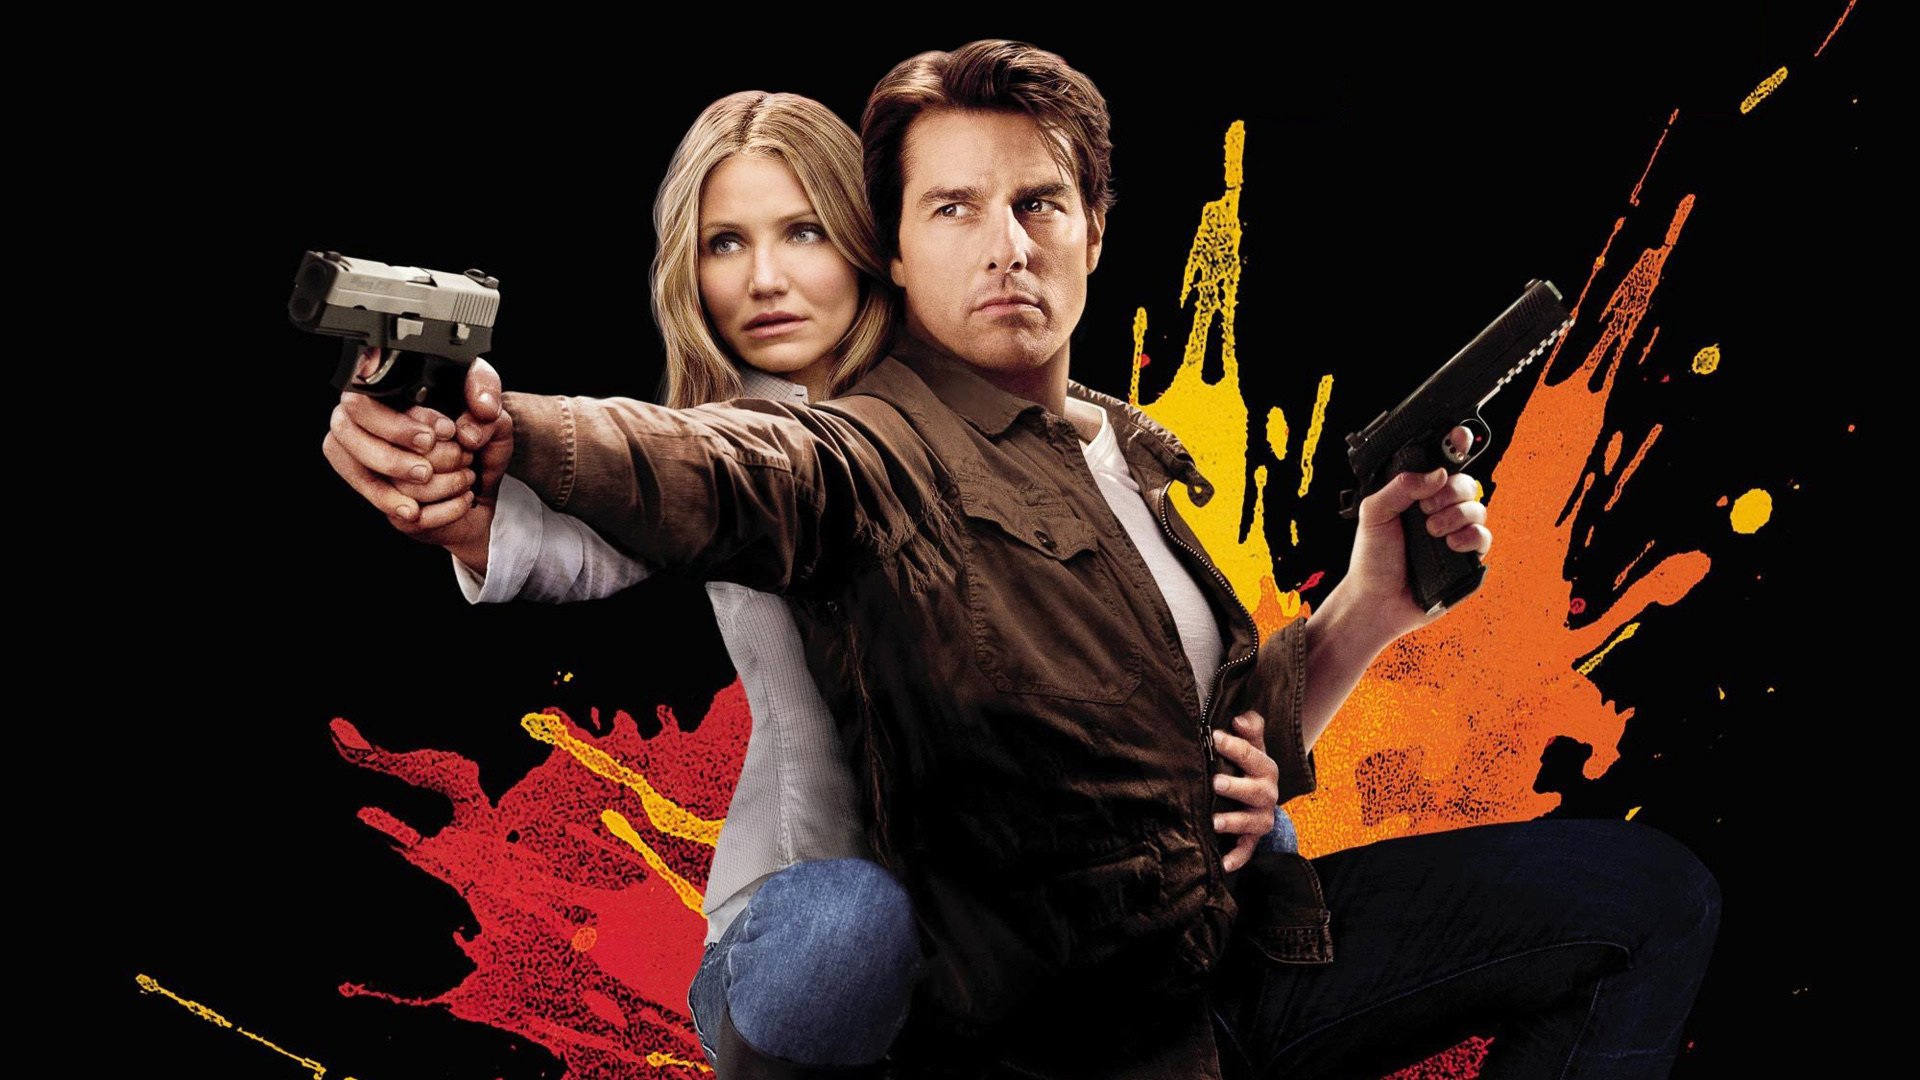 Wallpaper Cameron Diaz and Tom Cruise in Knight and Day, 2010 movie, poster